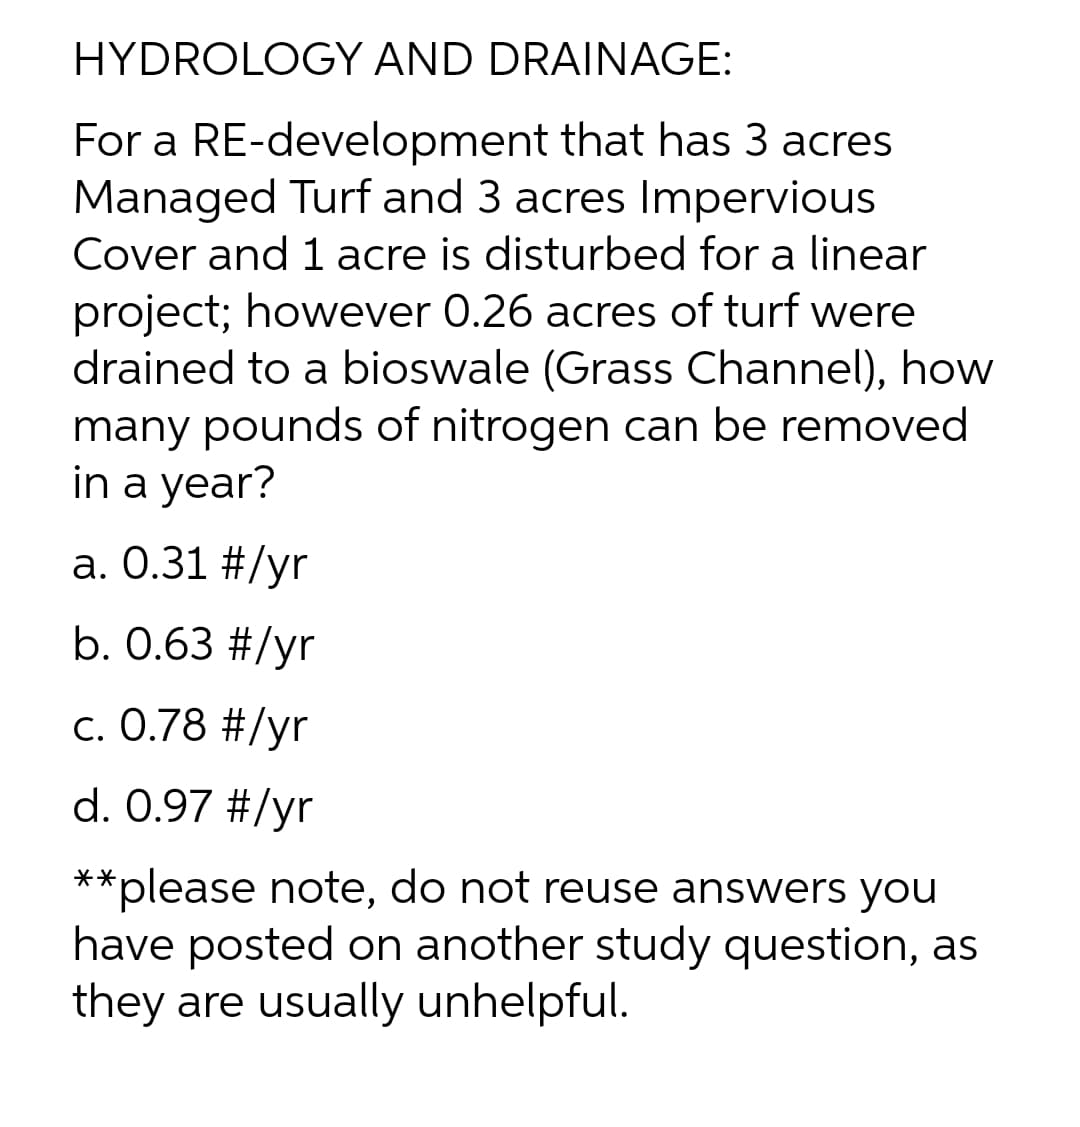 HYDROLOGY AND DRAINAGE:
For a RE-development that has 3 acres
Managed Turf and 3 acres Impervious
Cover and 1 acre is disturbed for a linear
project; however 0.26 acres of turf were
drained to a bioswale (Grass Channel), how
many pounds of nitrogen can be removed
in a year?
a. 0.31 #/yr
b. 0.63 #/yr
c. 0.78 #/yr
d. 0.97 #/yr
**please note, do not reuse answers you
have posted on another study question, as
they are usually unhelpful.
